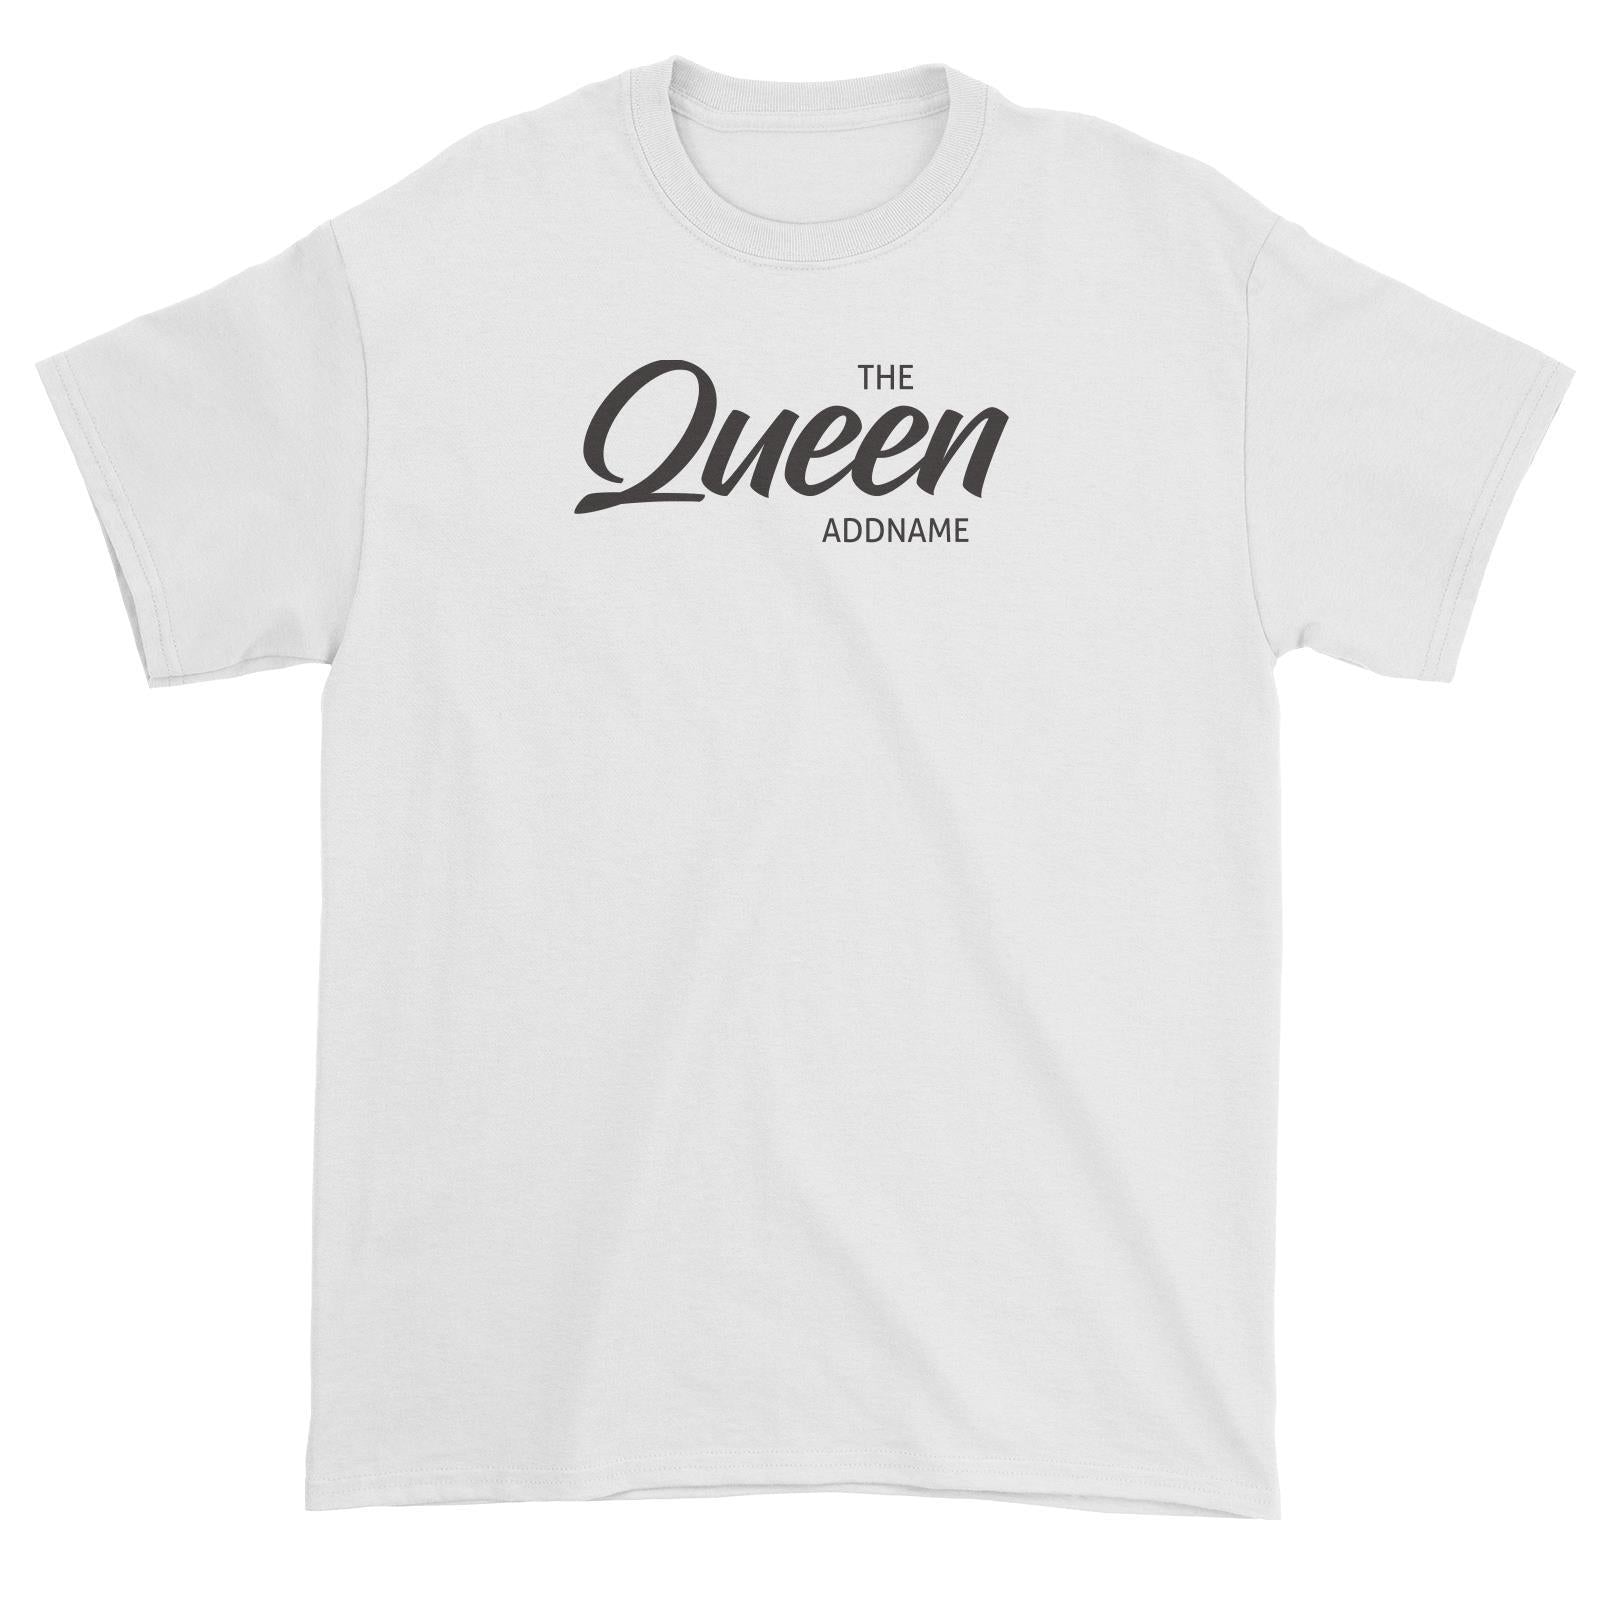 The Queen Addname Unisex T-Shirt Personalizable Designs Matching Family Royal Family Edition Royal Simple